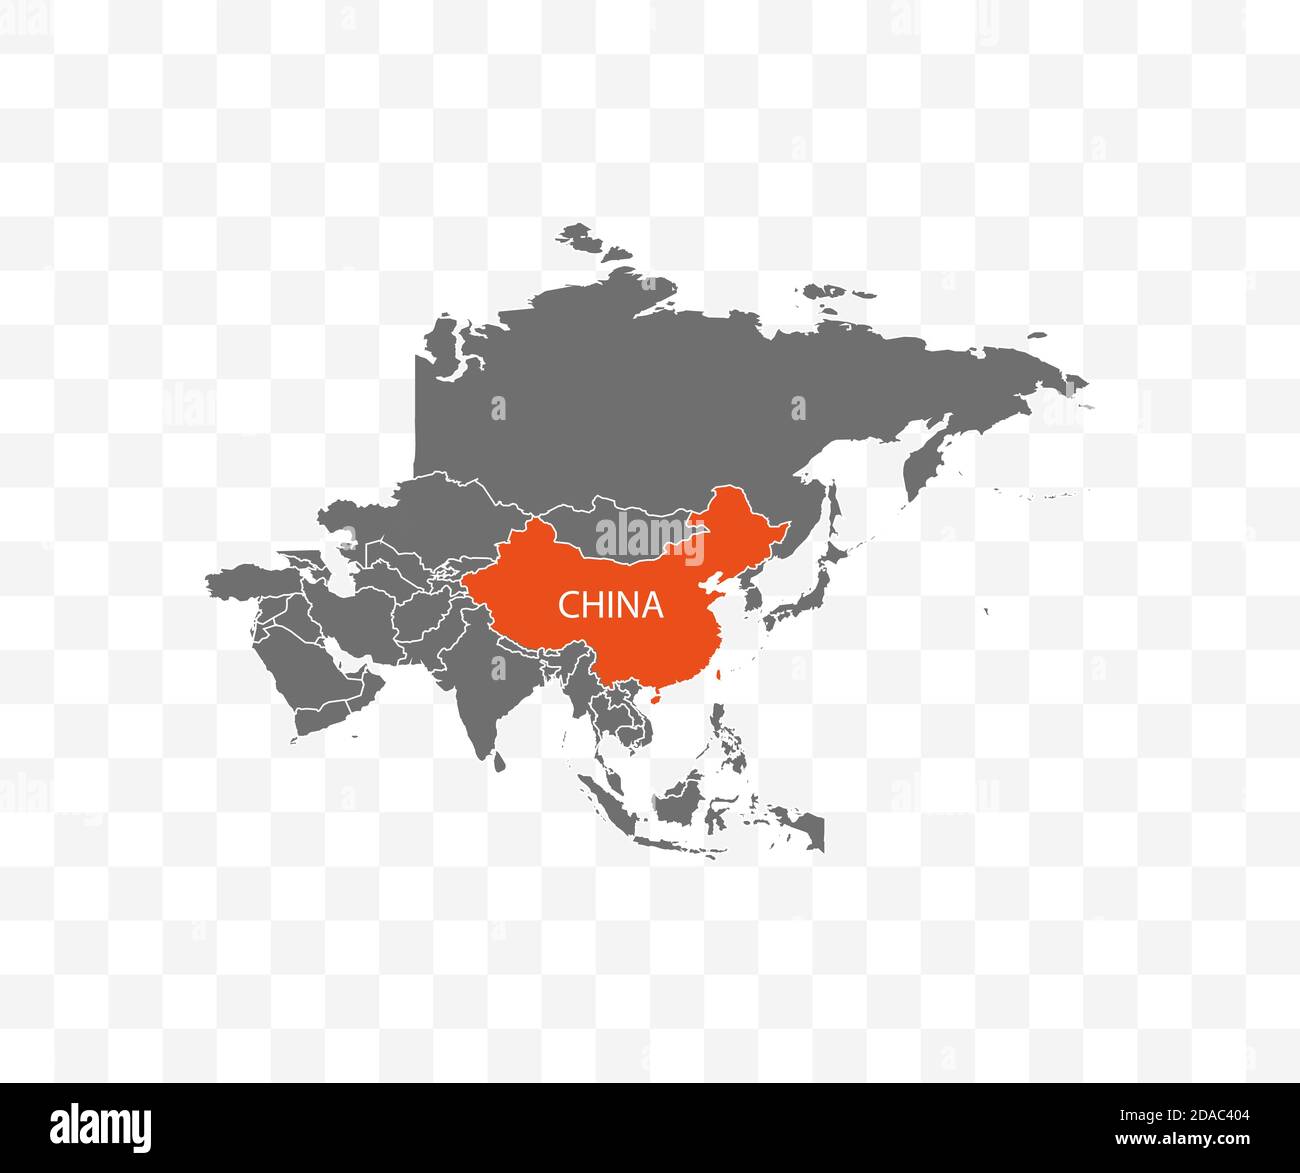 China on asia map vector. Vector illustration. Stock Vector